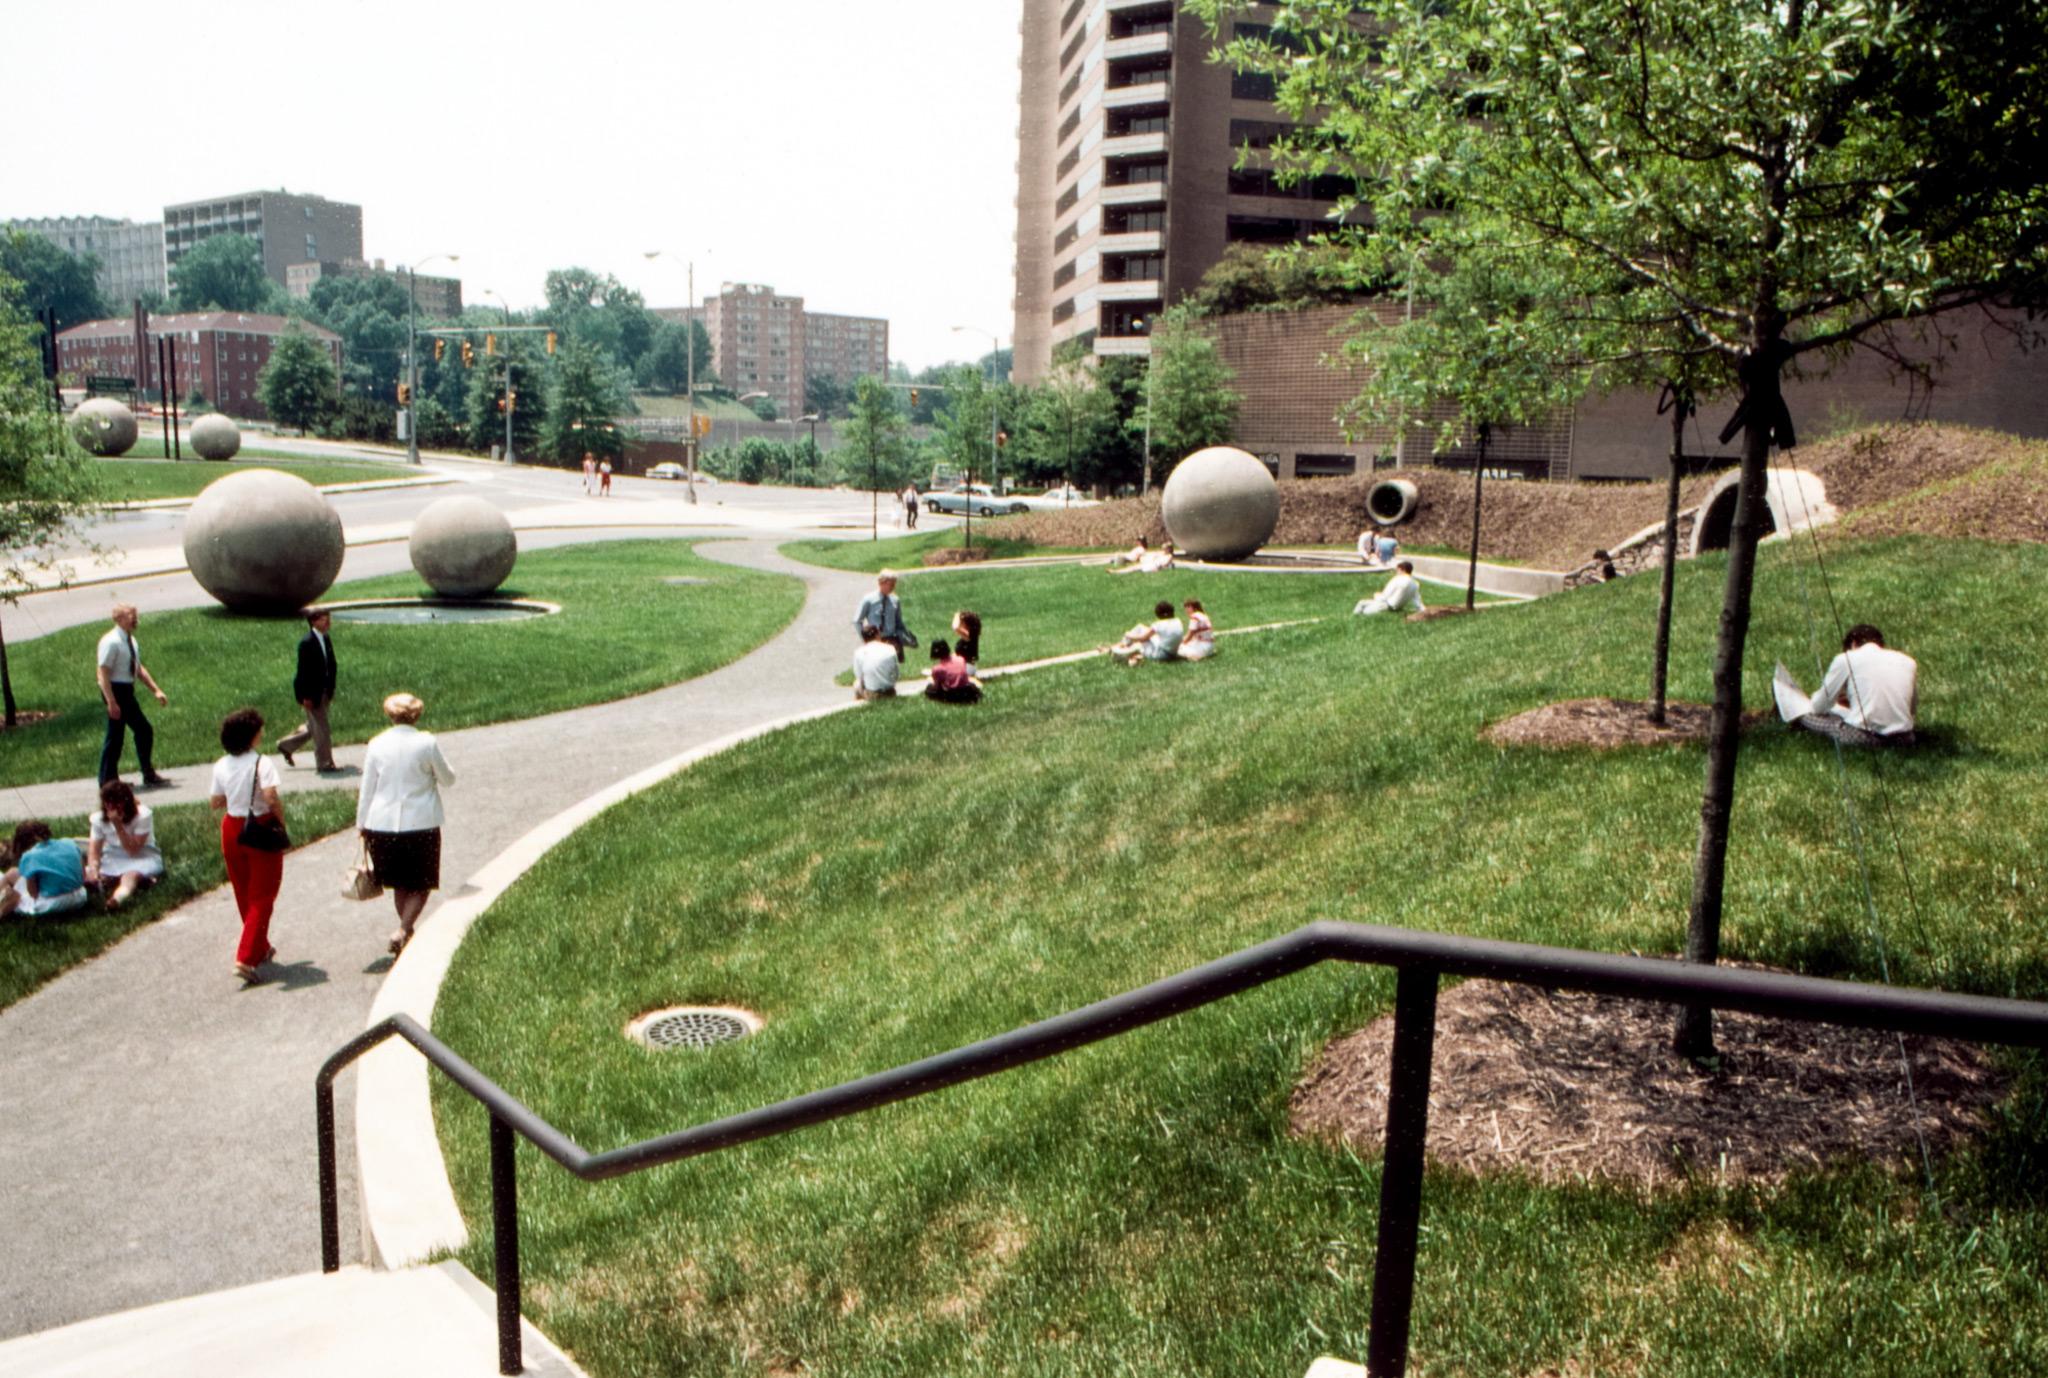 people walk and sit in a city park that features grass, small trees, and large concrete spheres